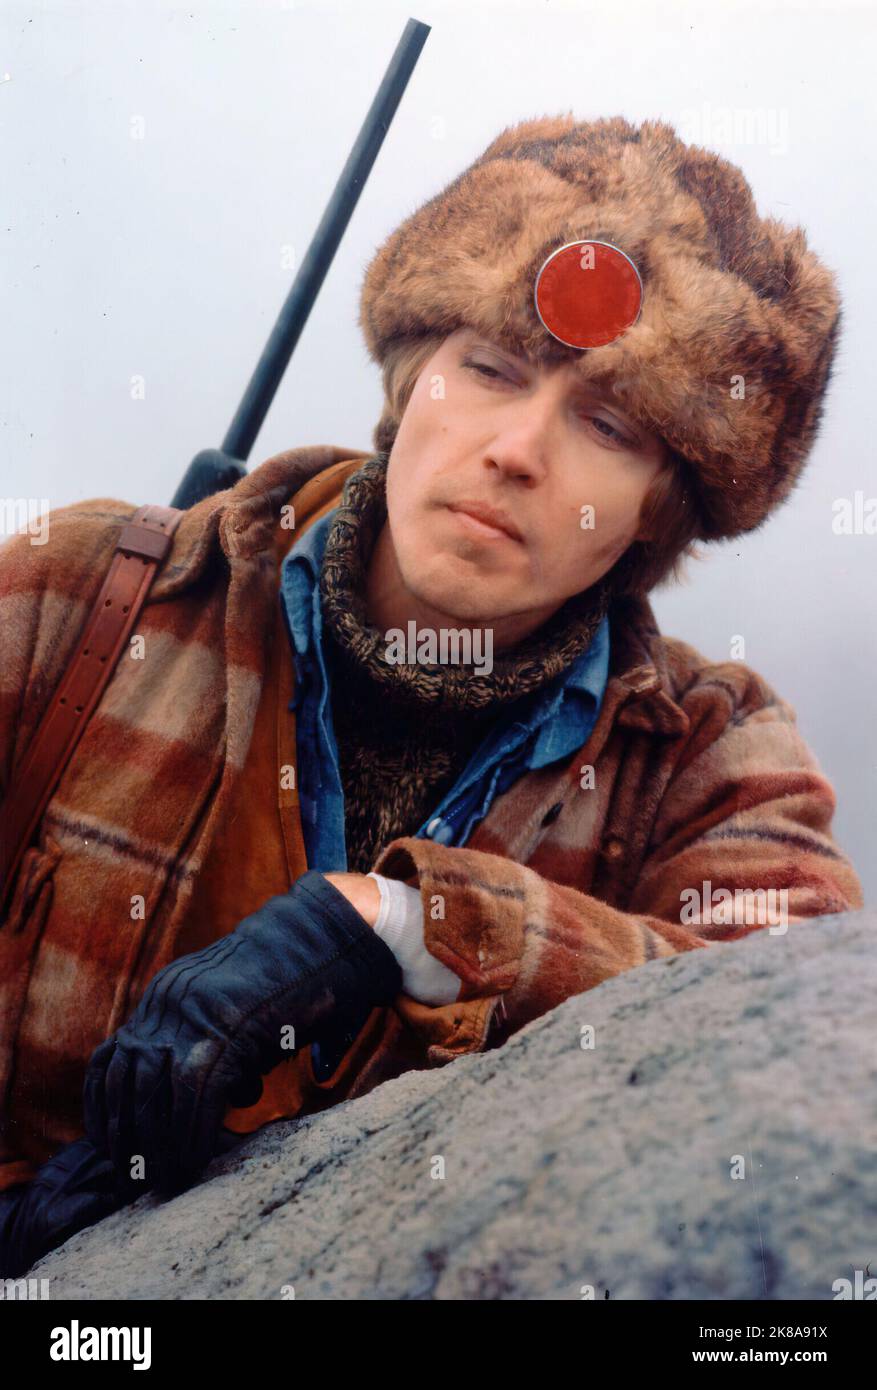 CHRISTOPHER WALKEN in THE DEER HUNTER (1978), directed by MICHAEL CIMINO. Copyright: Editorial use only. No merchandising or book covers. This is a publicly distributed handout. Access rights only, no license of copyright provided. Only to be reproduced in conjunction with promotion of this film. Credit: EMI / UNIVERSAL / Album Stock Photo